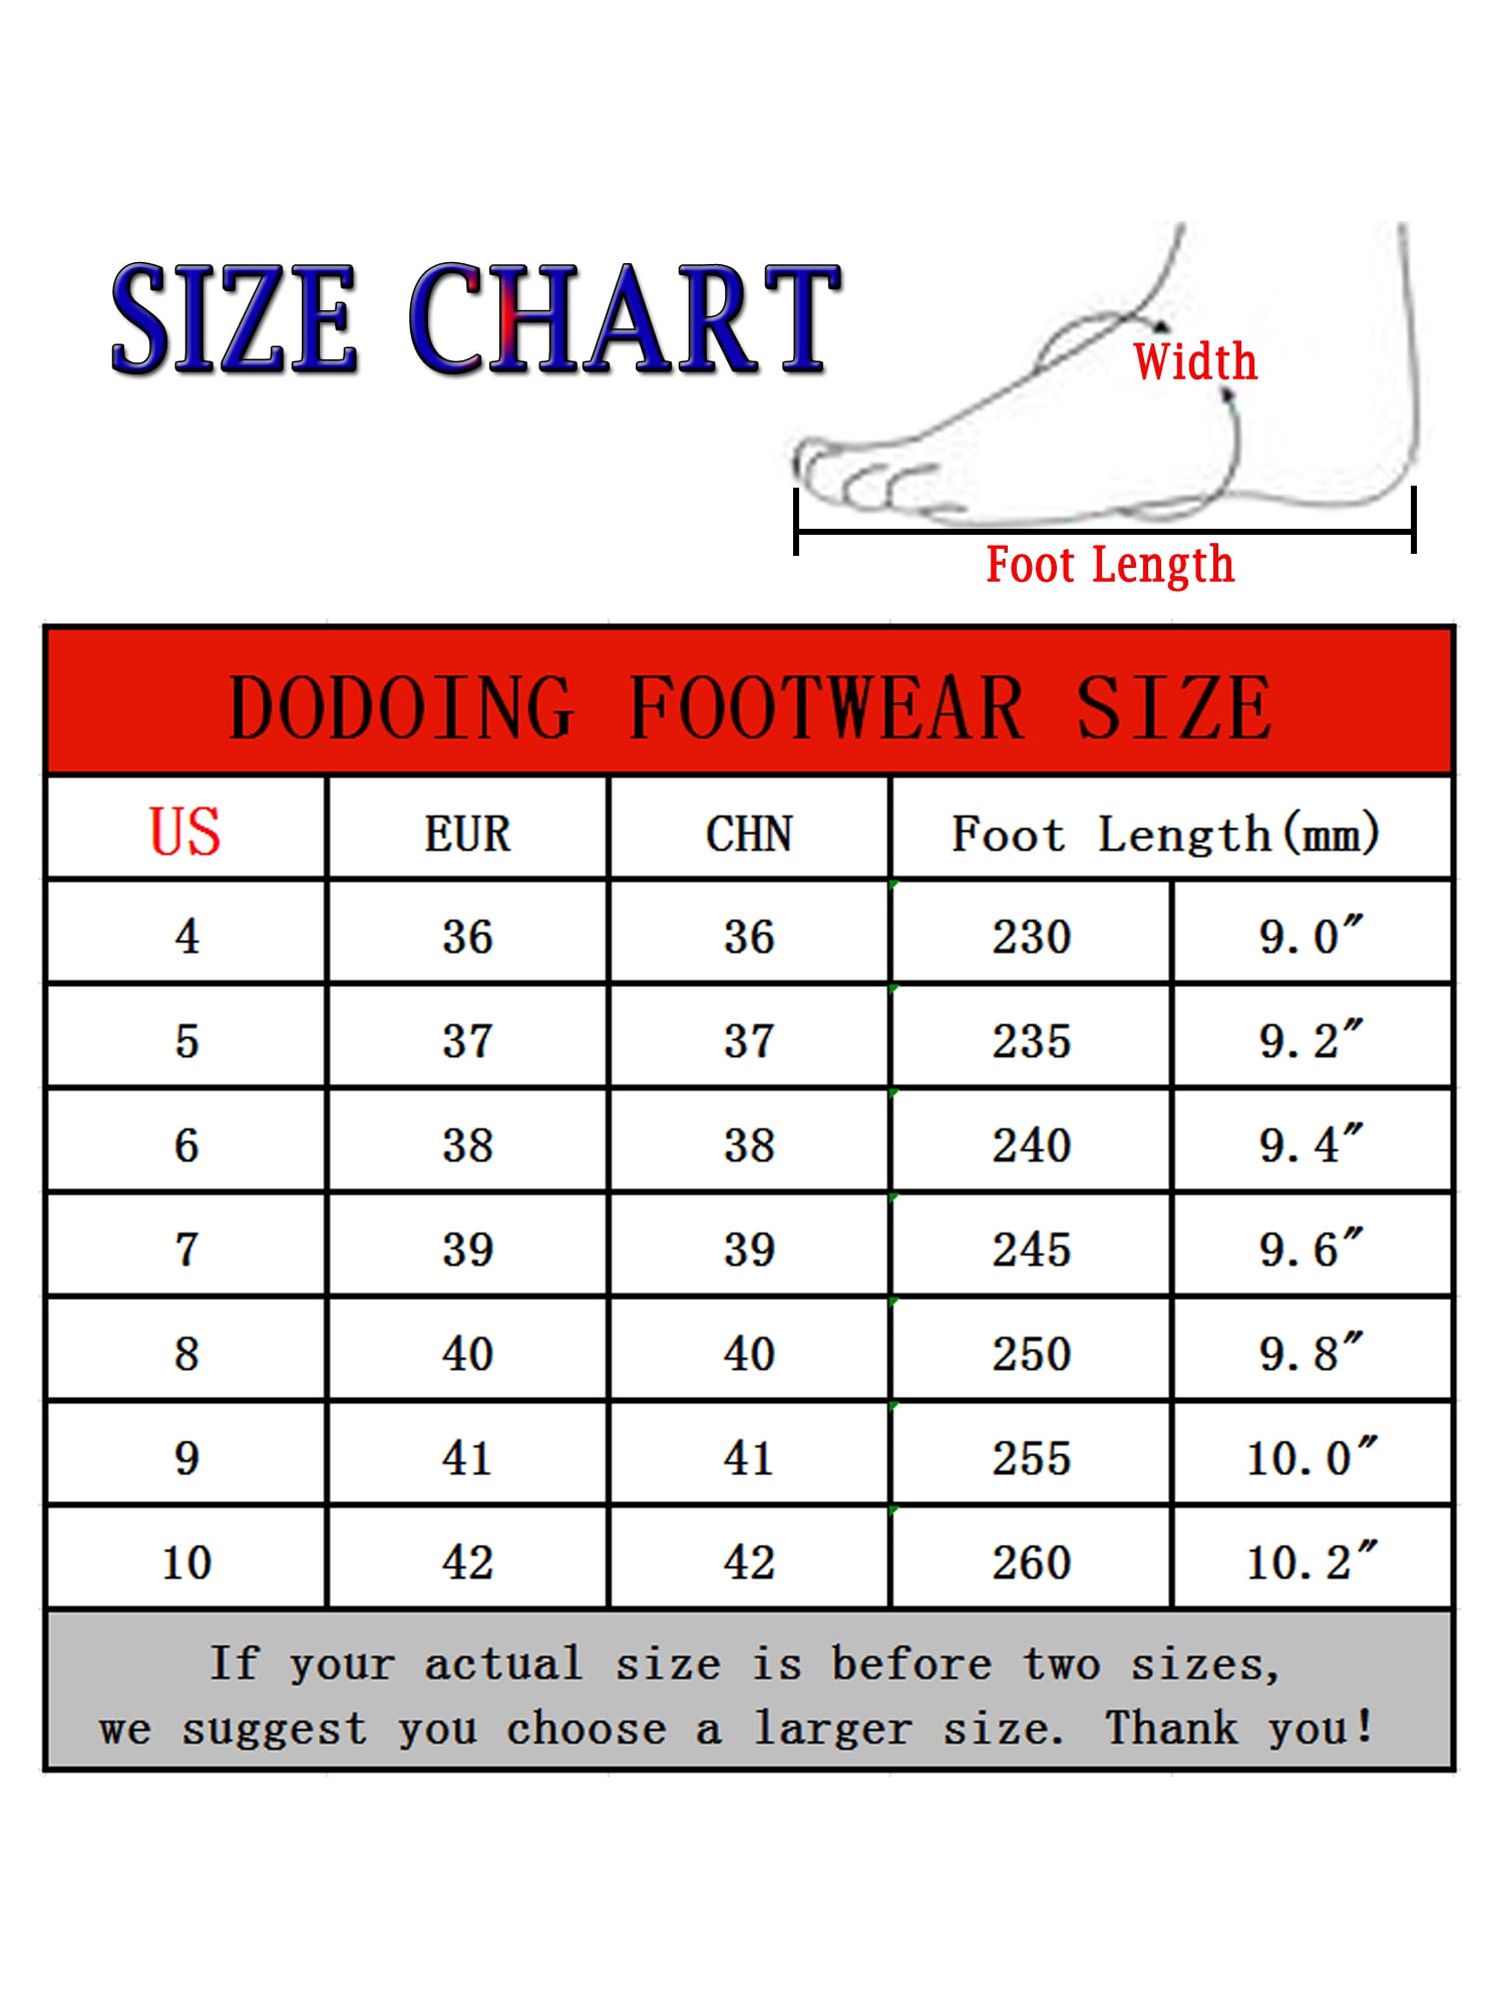 DODOING Women's Casual Wide Width Fit Flat Office Shoes Non-Slip Flat Walking Shoes with Delicate Embroidery Flower Slip On Flats Shoes Round Toe Ballet Flats (4-10 Size) - image 2 of 7